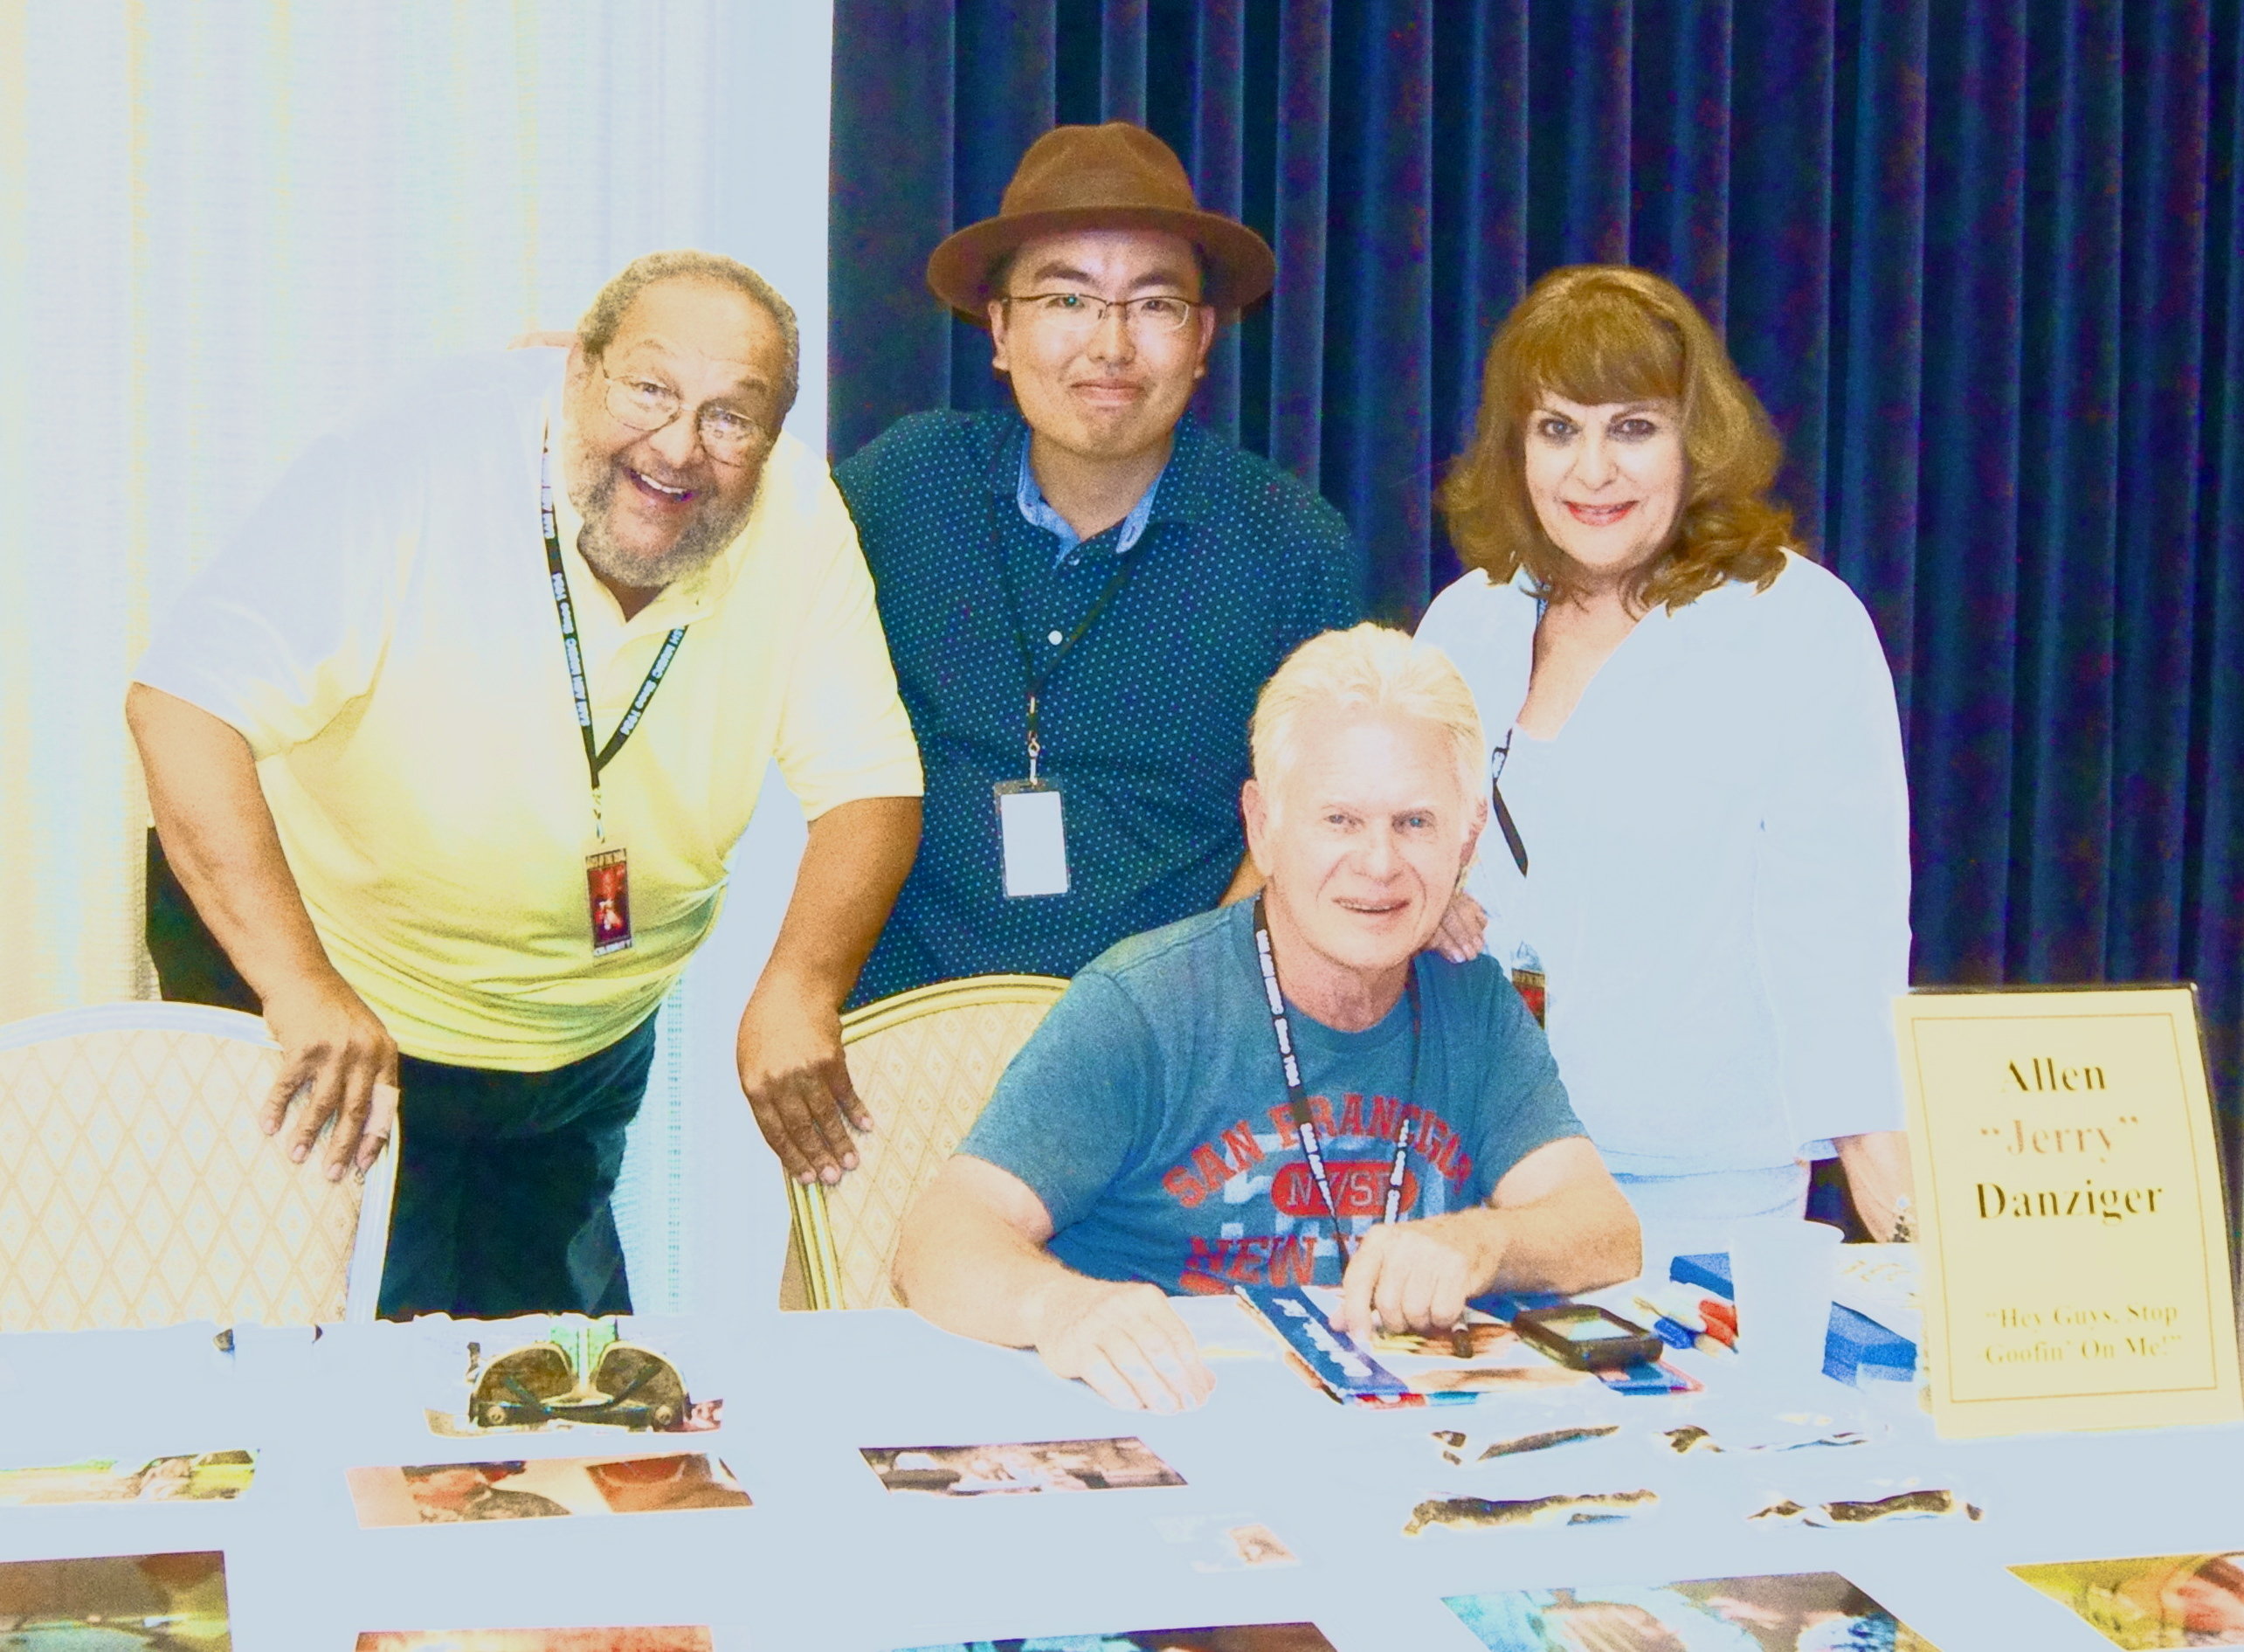 This photo was from the best reunion of The Texas Chain Saw Massacre (1974) at Days of the Dead in USA in 2012. From the left, ''Cattle Truck Driver'' Ed Guinn, ''Corman Award Winning Filmmaker'' Ryota Nakanishi, ''Jerry'' Allen Danziger and ''Pam''Teri McMinn.